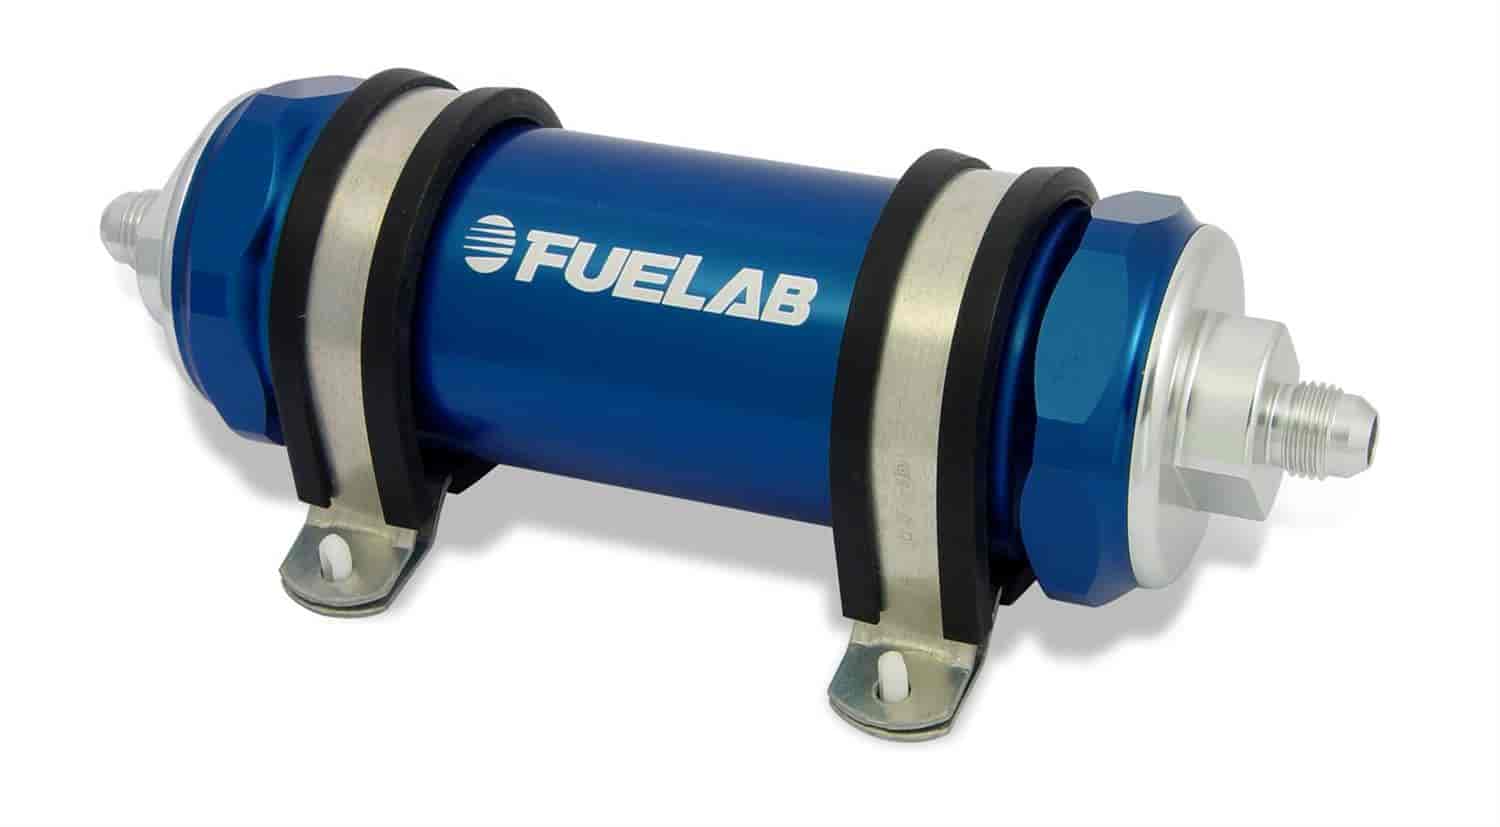 In-Line Fuel Filter Long Length -6AN Inlet/-10AN Outlet 75 micron stainless steel element